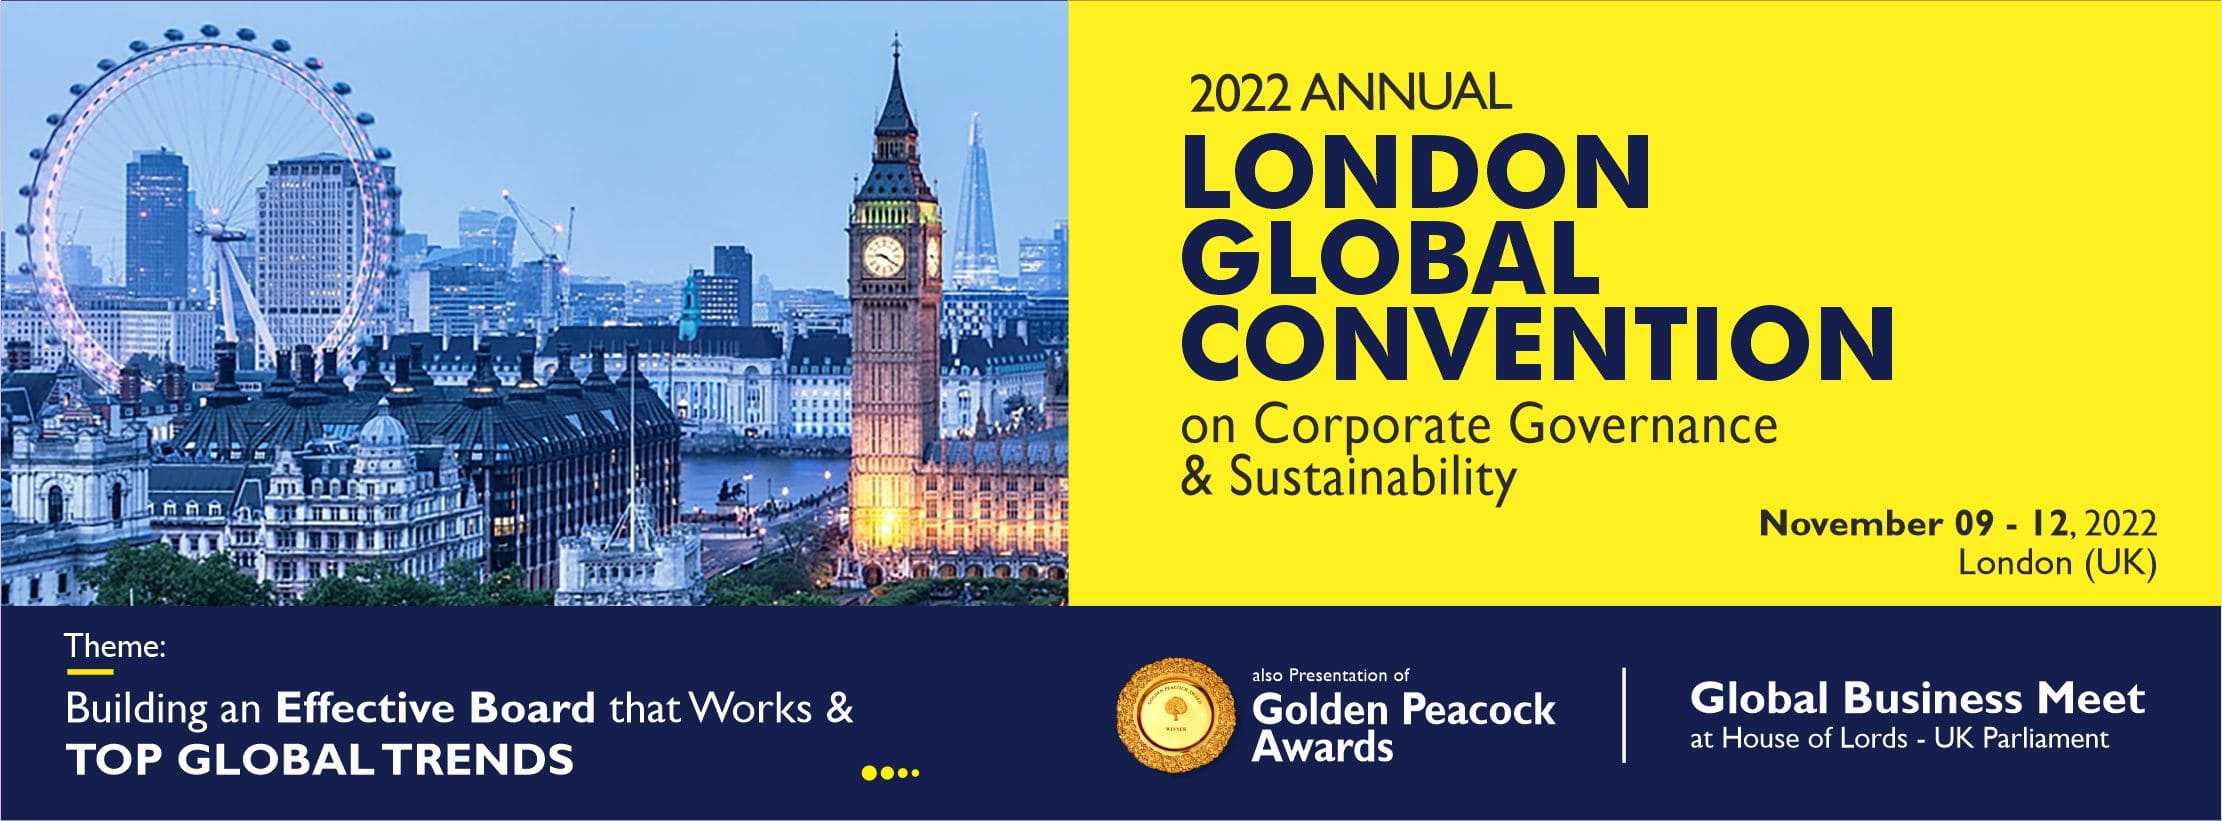 2022 London Global Convention on  Corporate Governance & Sustainability